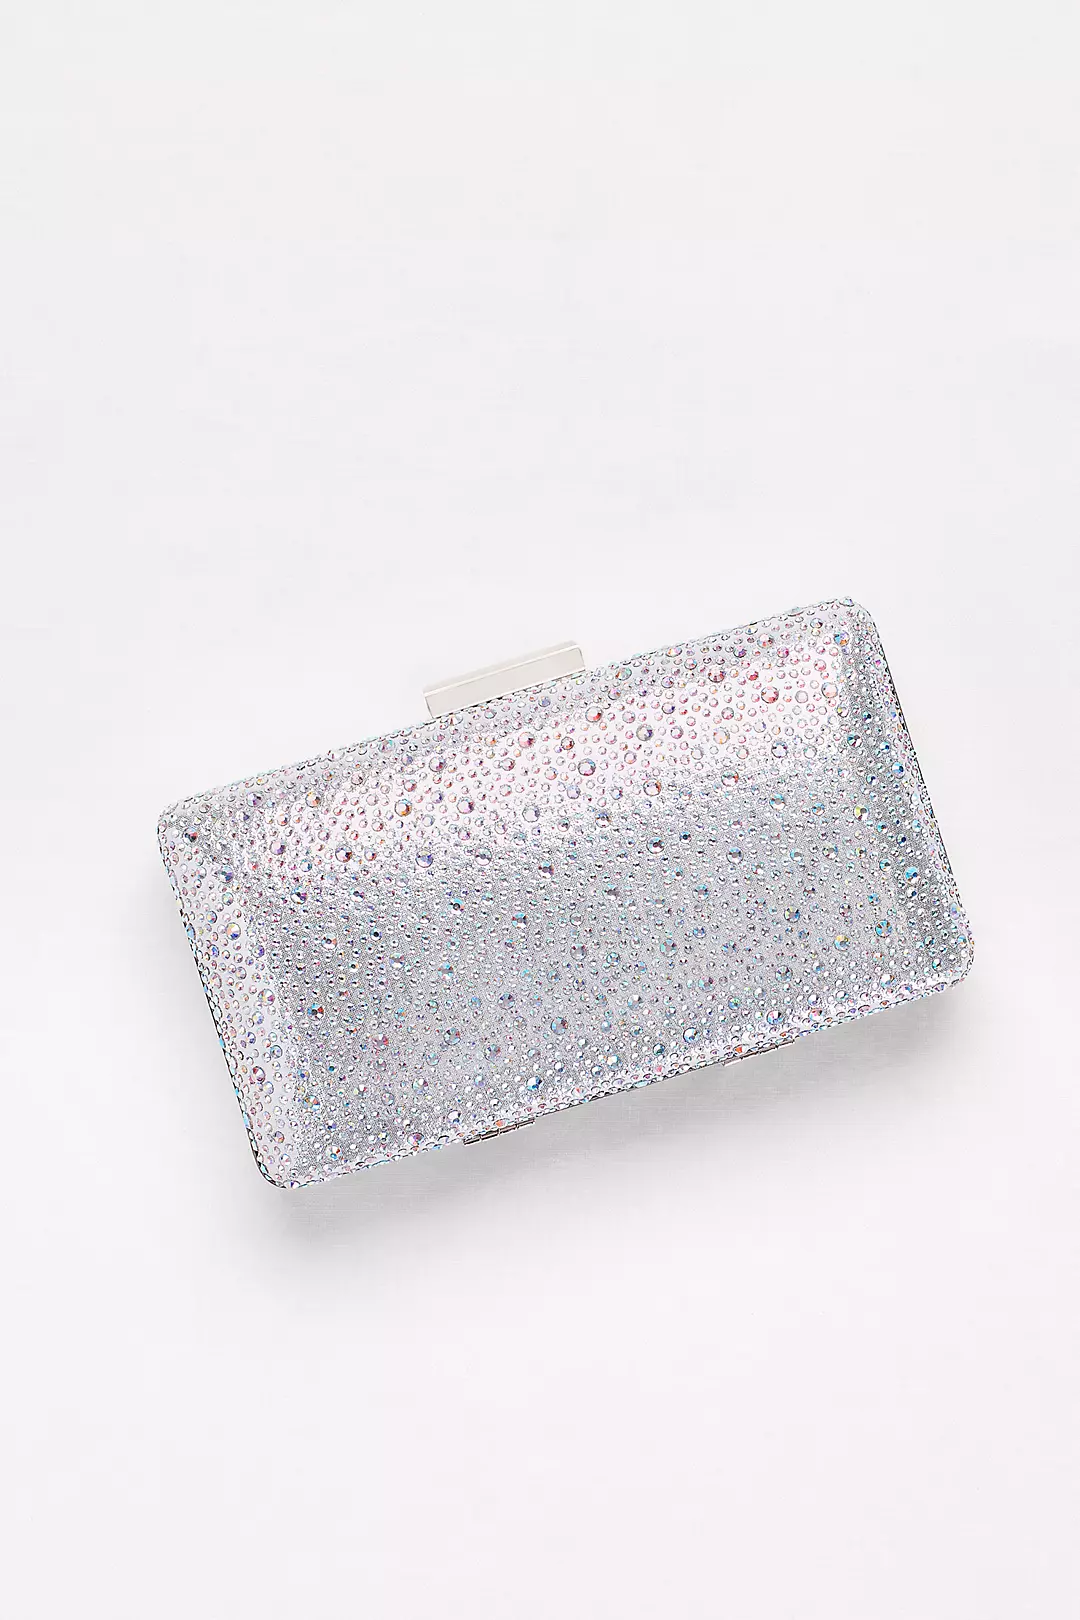 Crystal Scatter Minaudiere Image